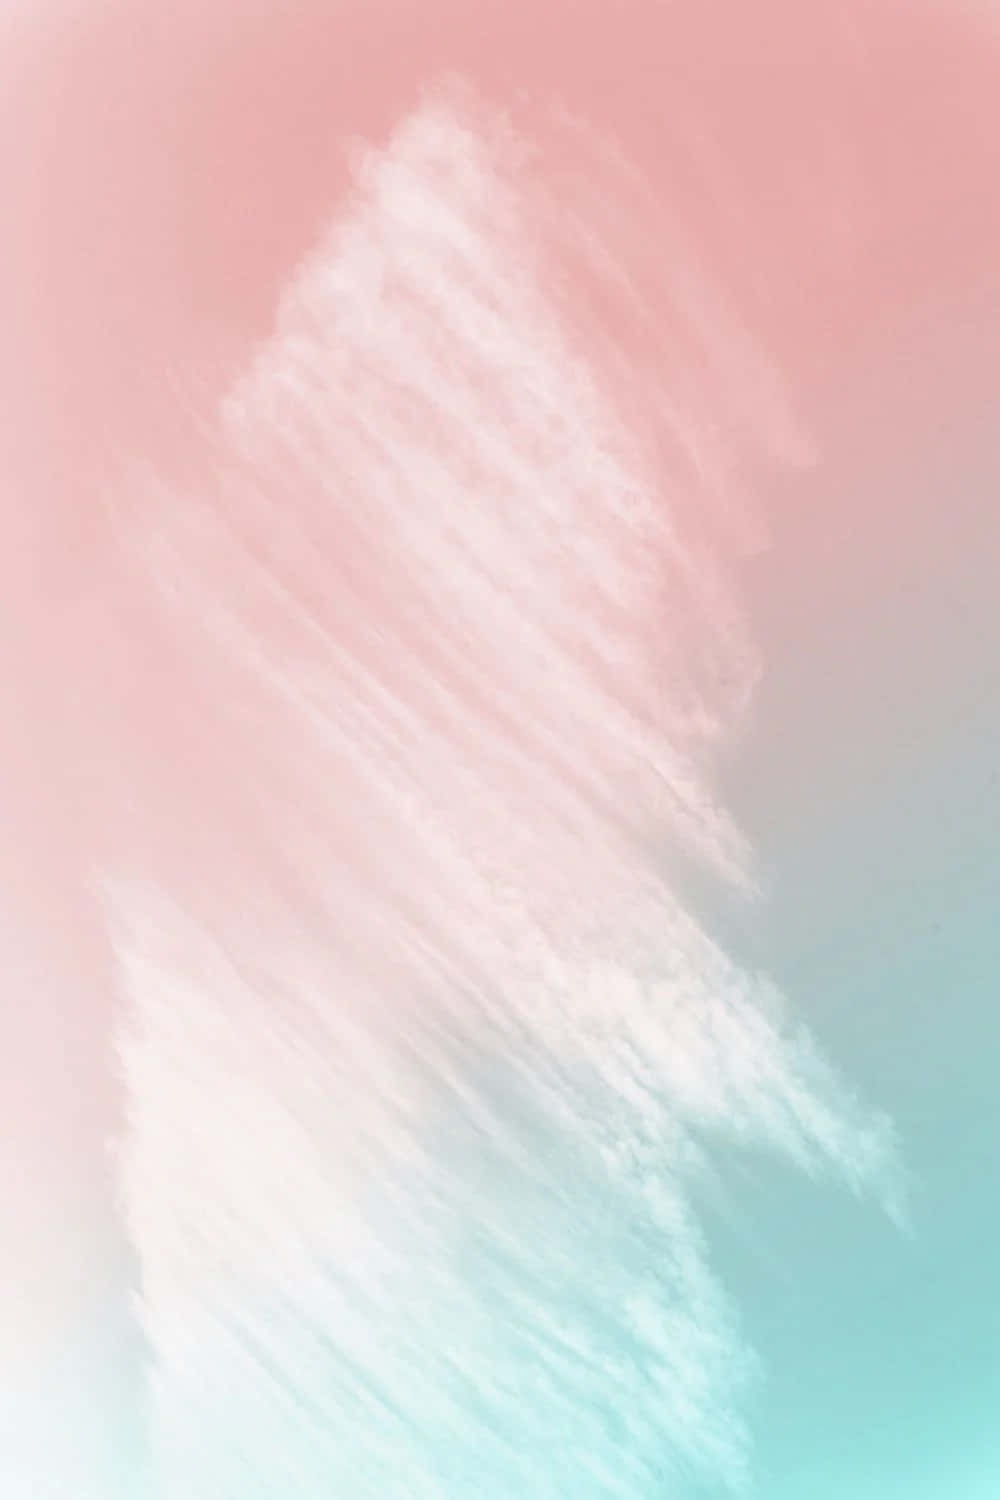 Aesthetically Pleasing Pastel Cute Background With Soft Color Gradient